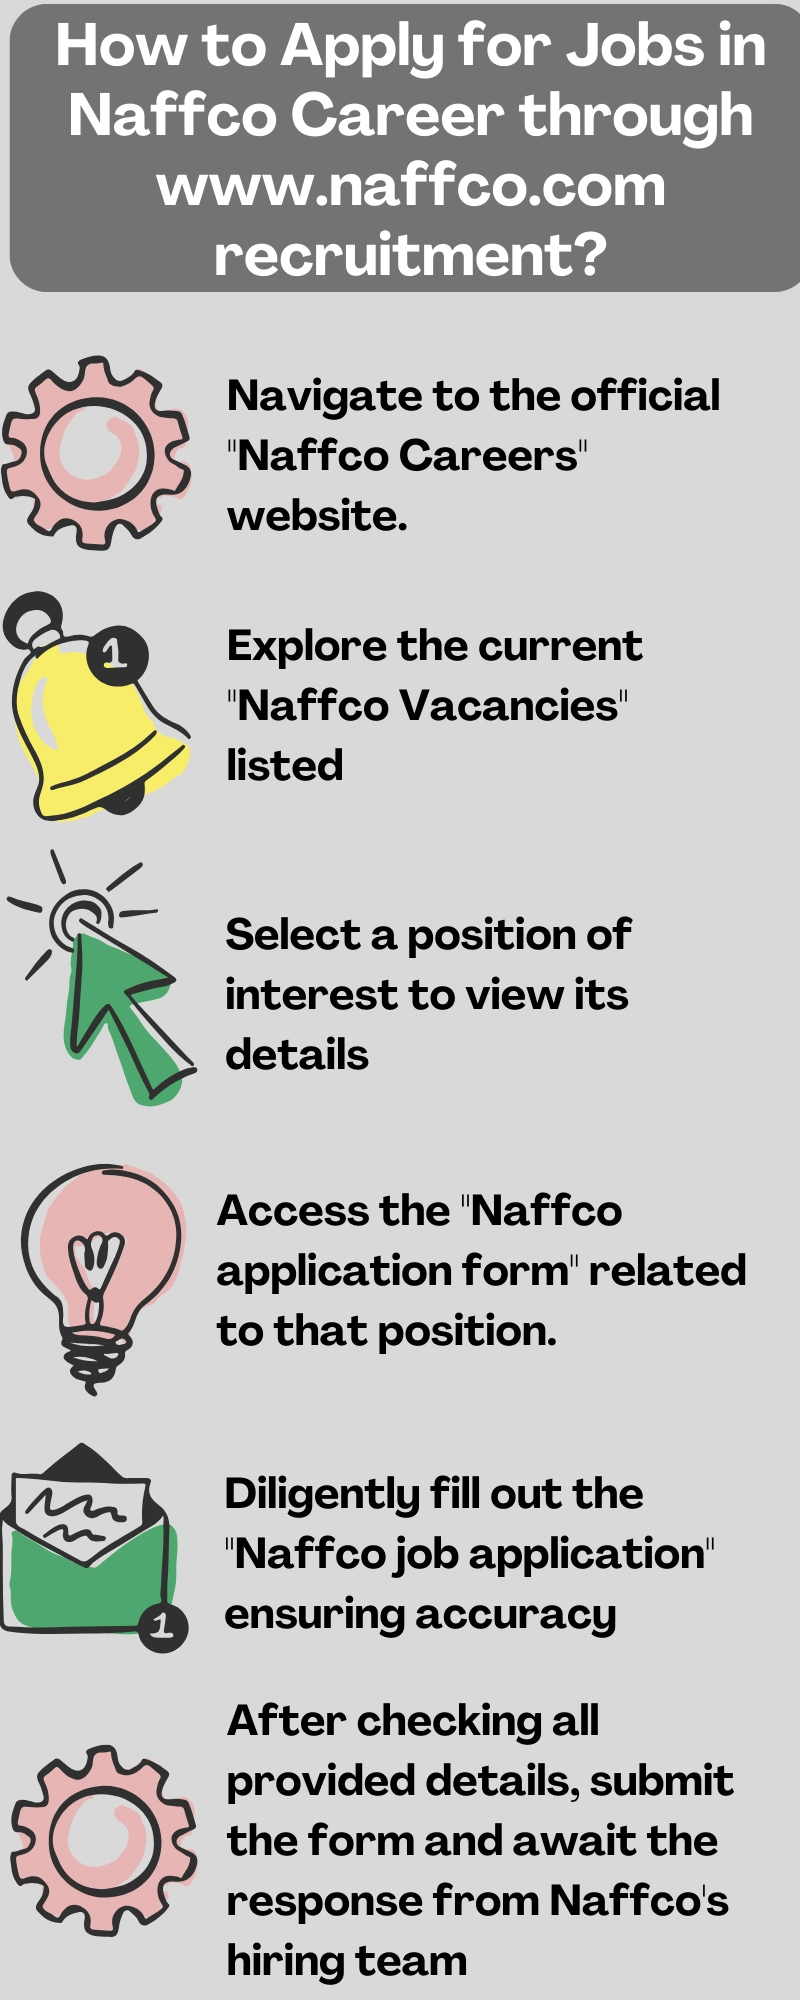 How to Apply for Jobs in Naffco Career through www.naffco.com recruitment?